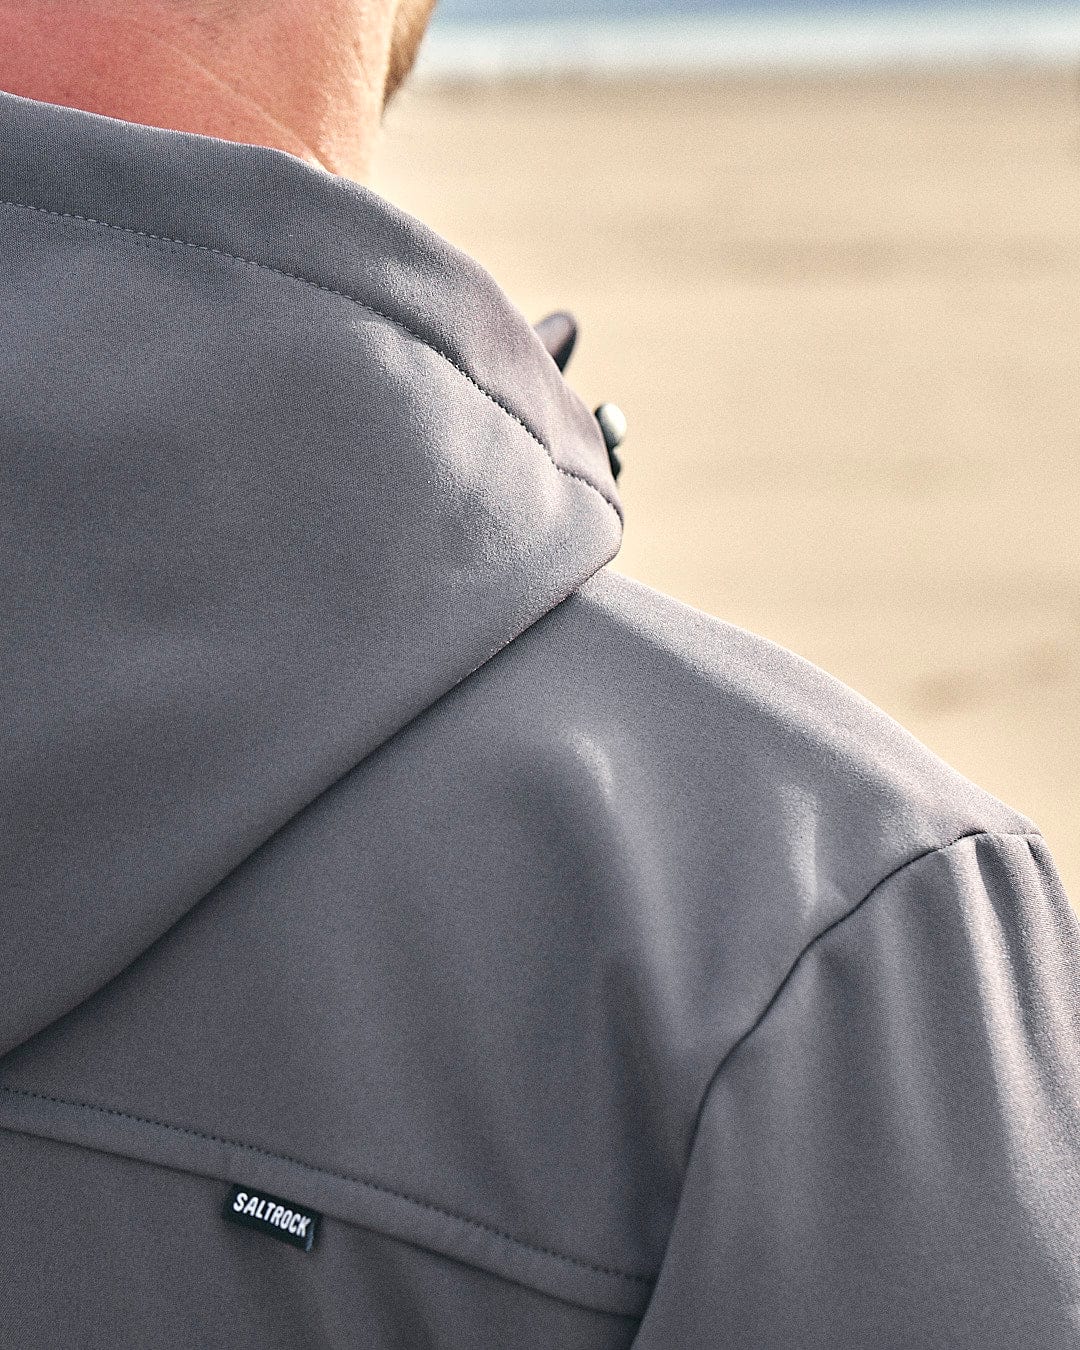 The back of a person wearing a Saltrock Munros - Mens Softshell Jacket - Grey, made with water-resistant fabric and featuring zip pockets.